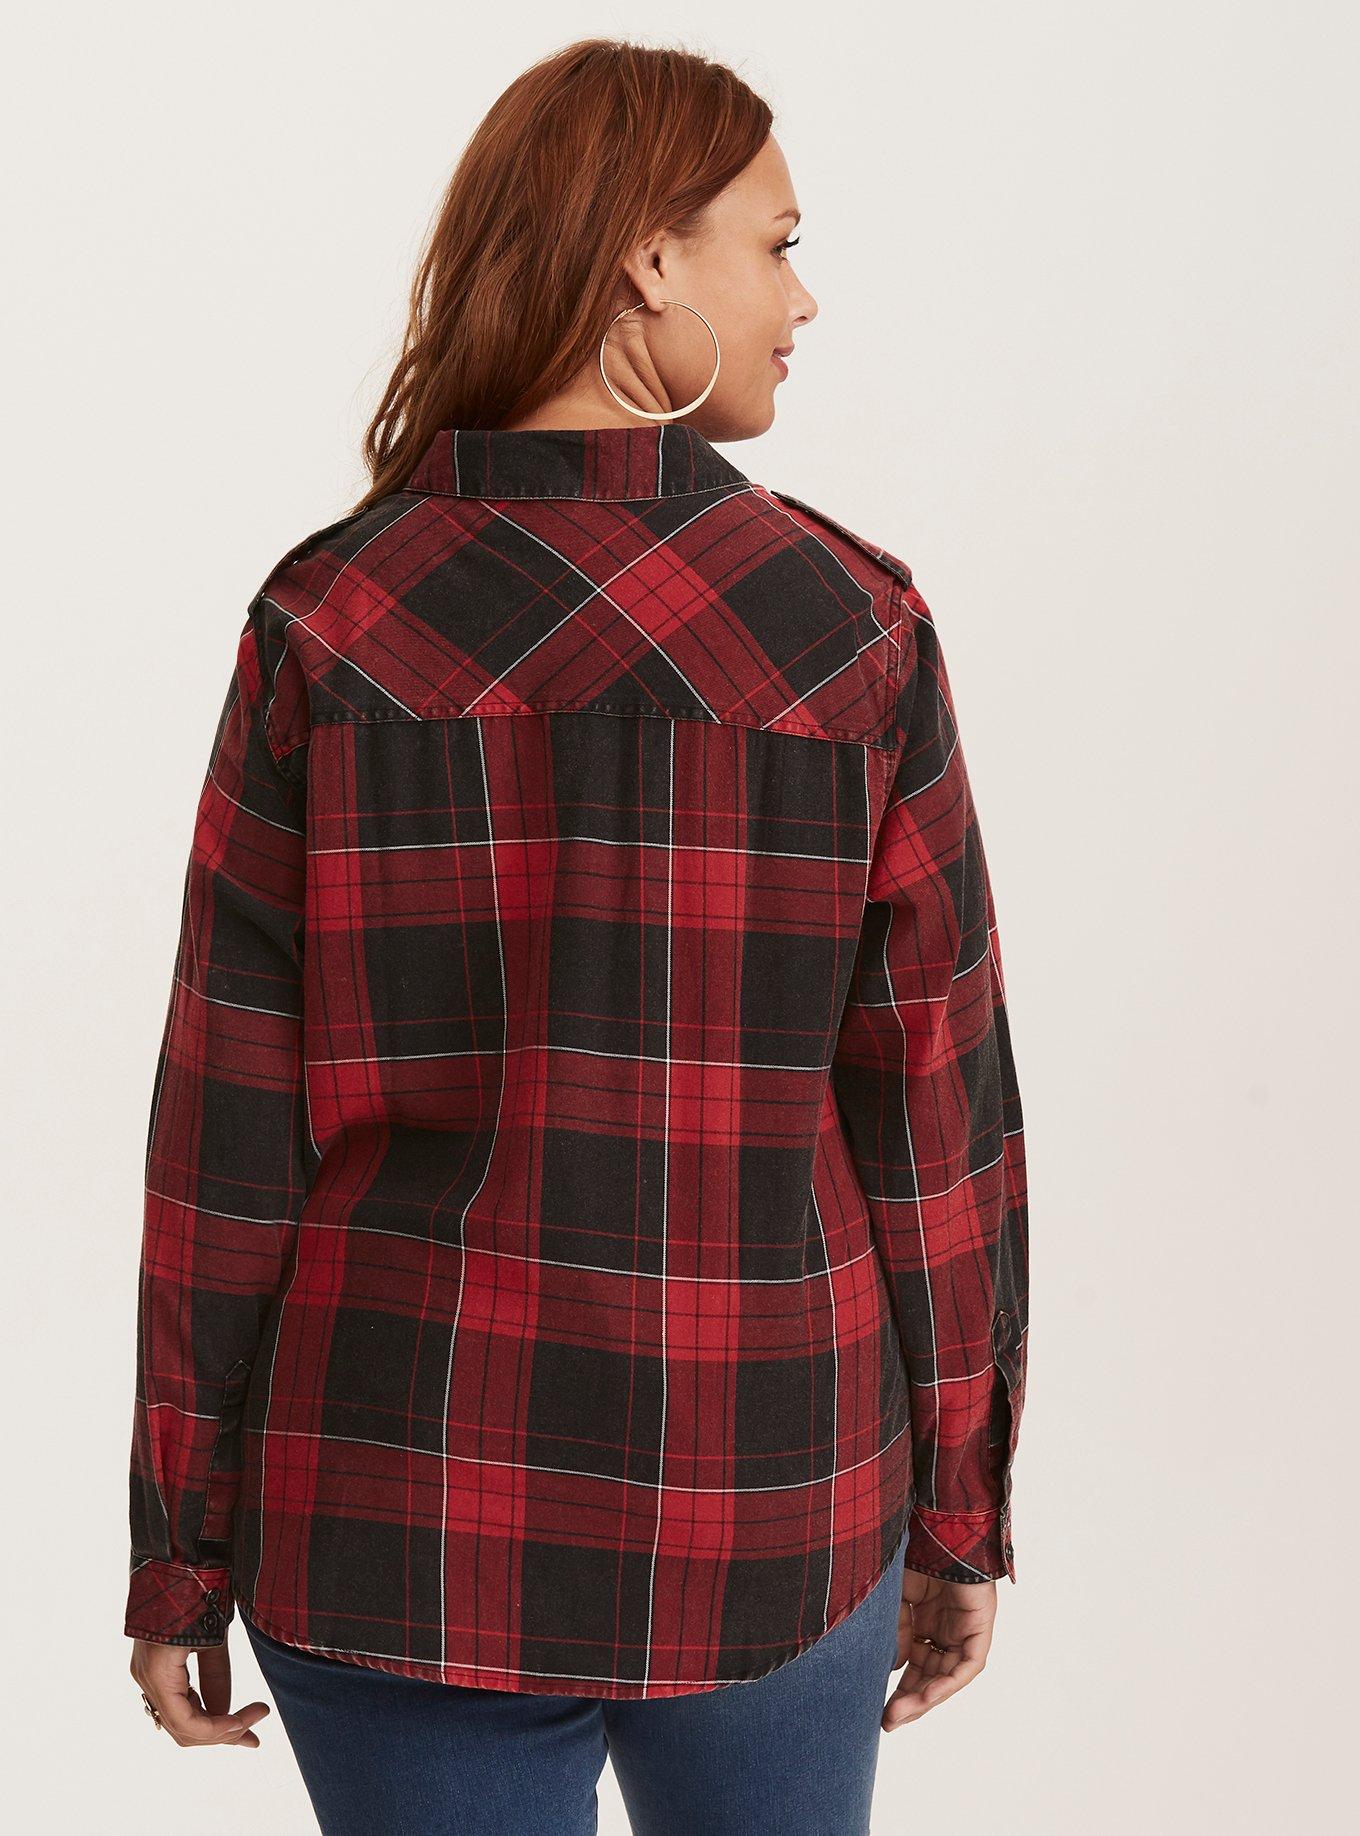 Pull plaid harry potter - Cdiscount